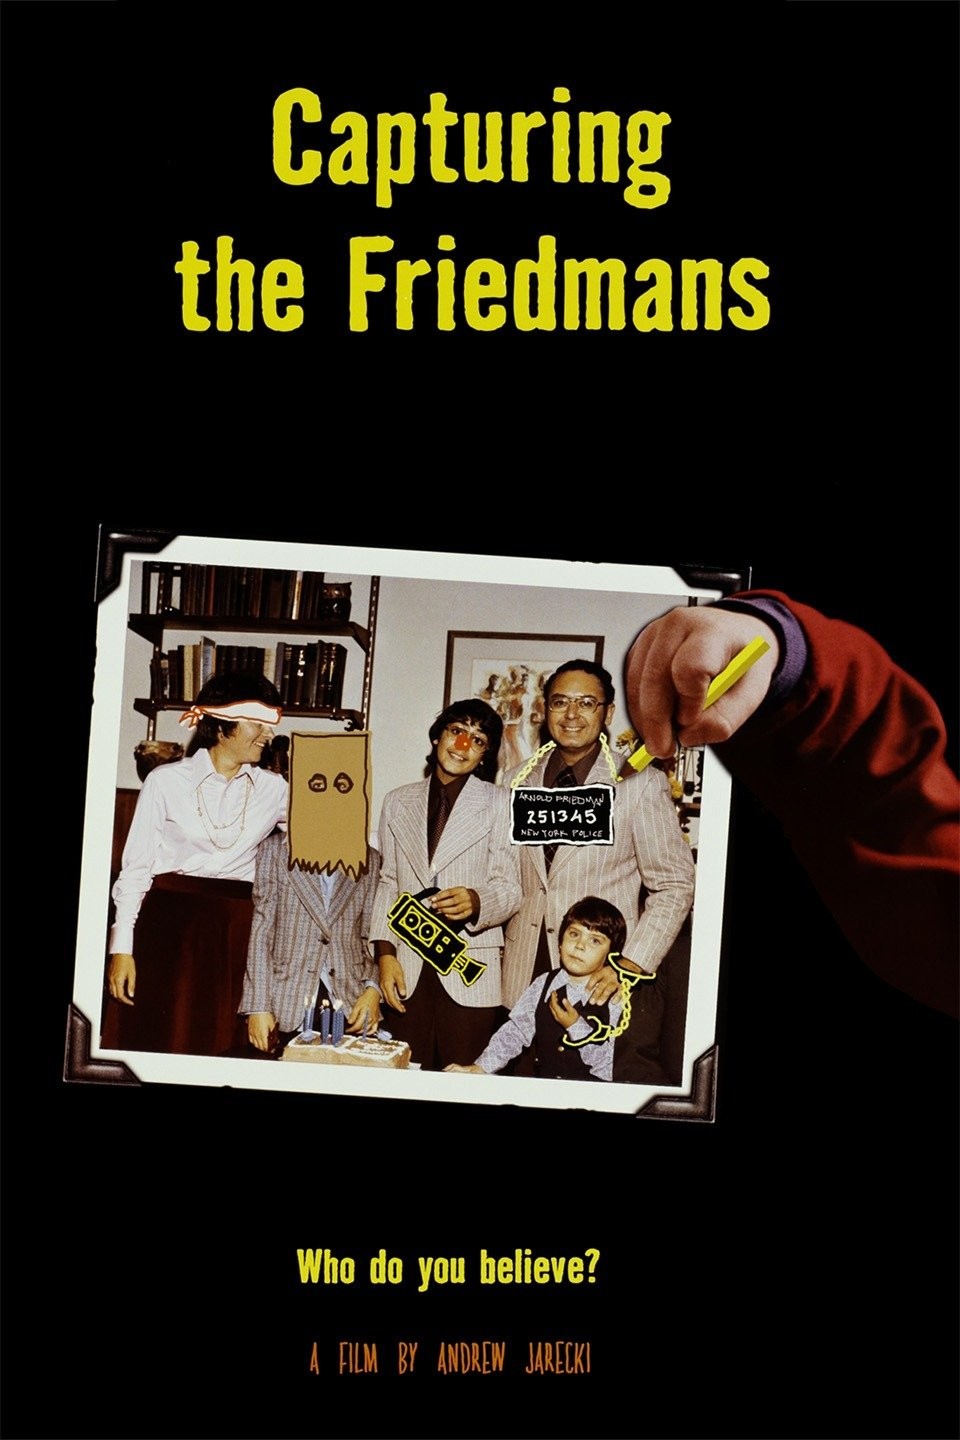 Current Ads, Friedmans Home Experience